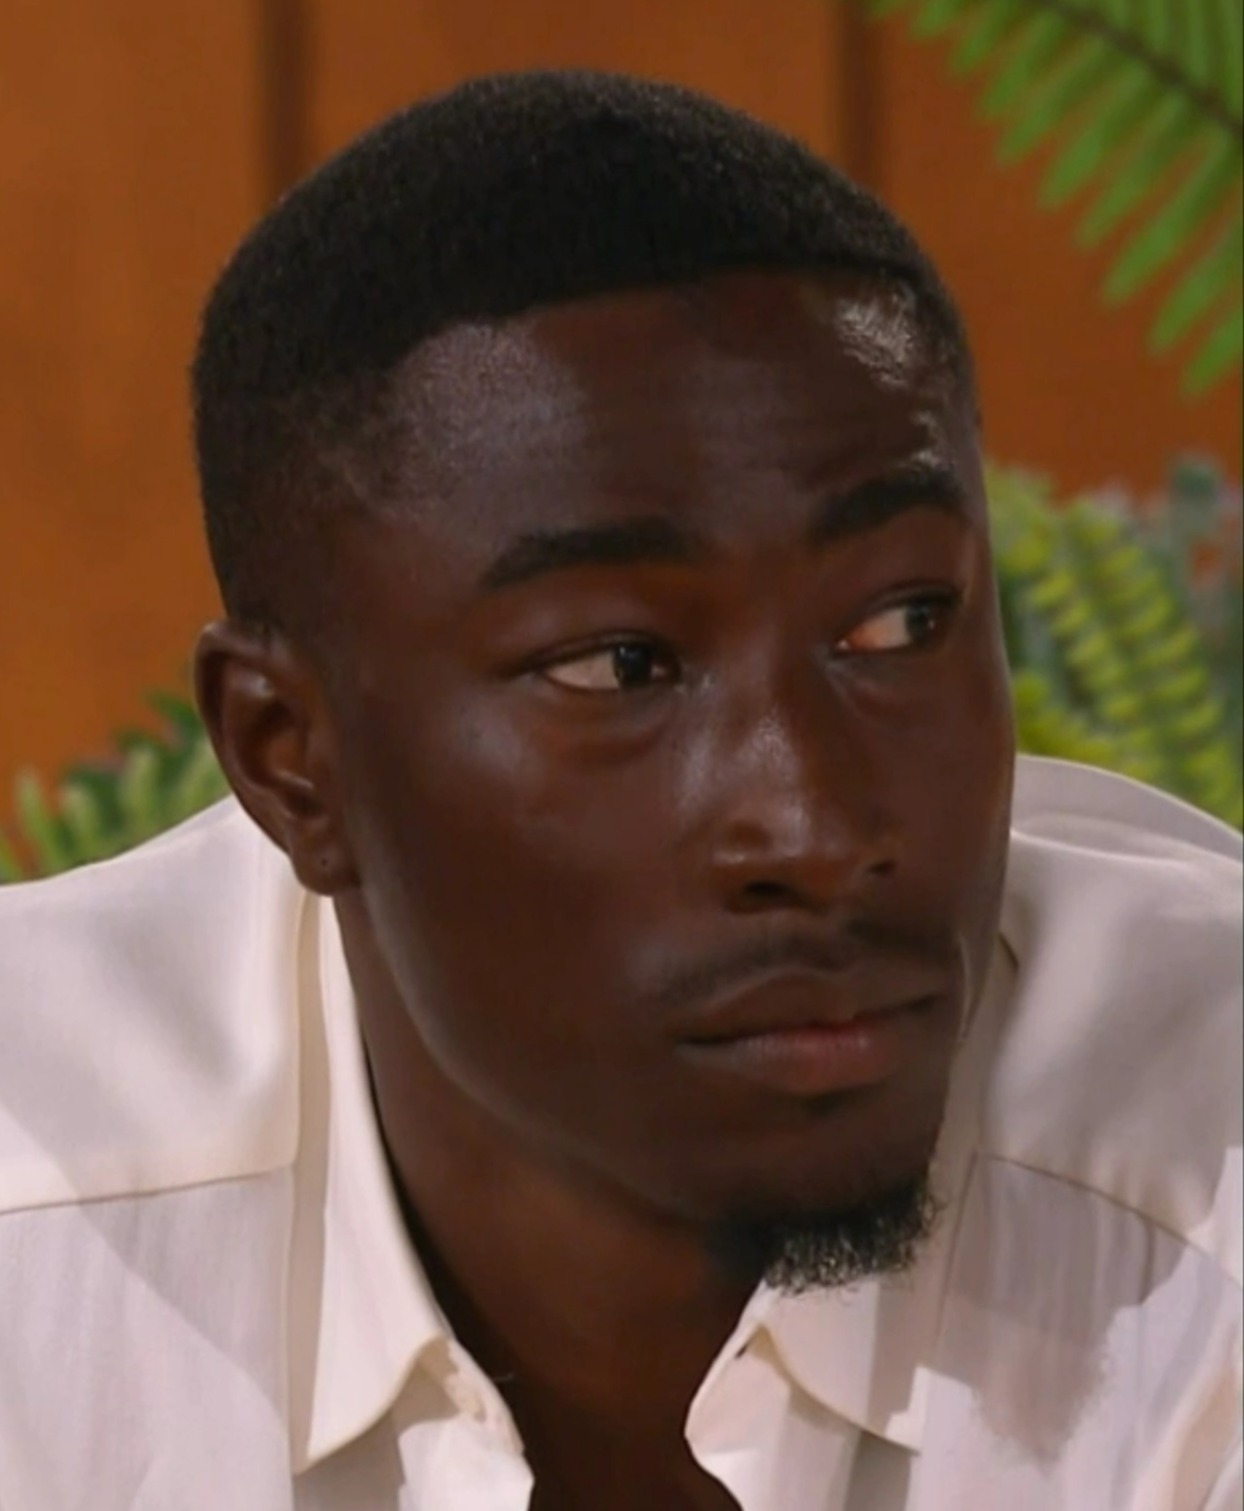 Love Island fans convinced an Islander has secretly quit the villa after ‘disappearing’ for THREE days